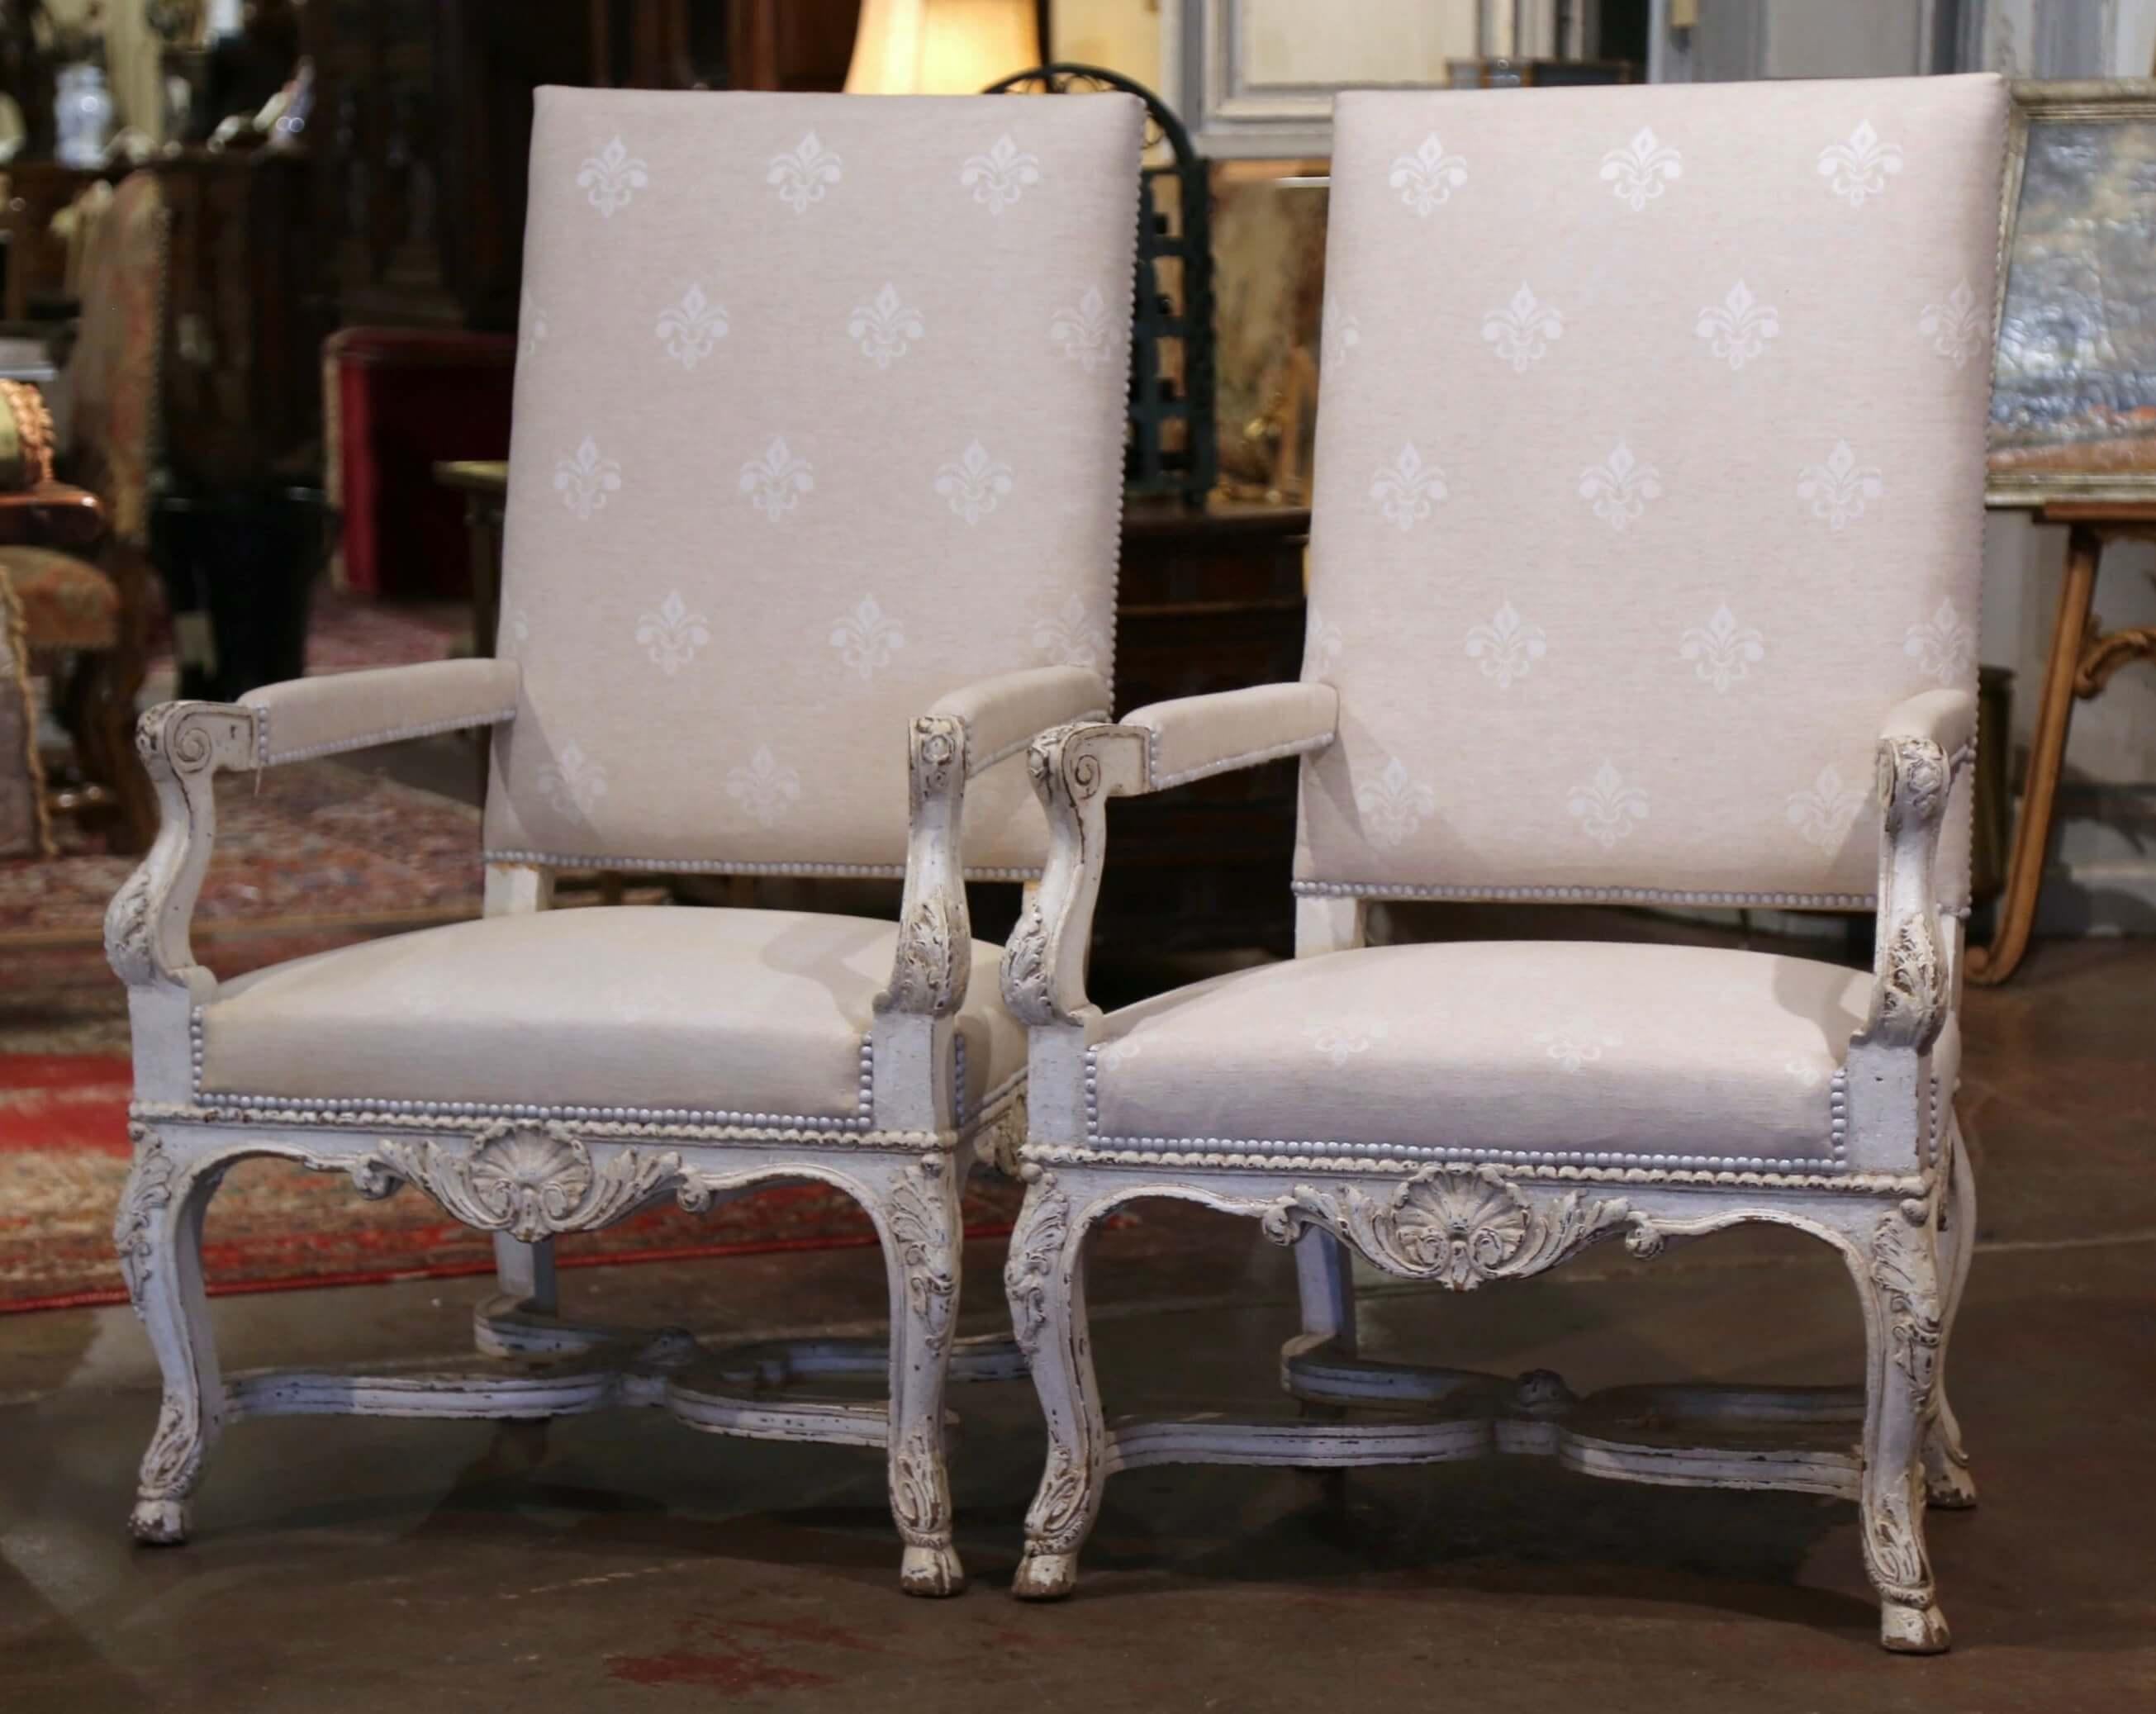 Pair of 19th Century Louis XIV Carved Painted Armchairs with Fleur-de-Lys Fabric In Excellent Condition For Sale In Dallas, TX